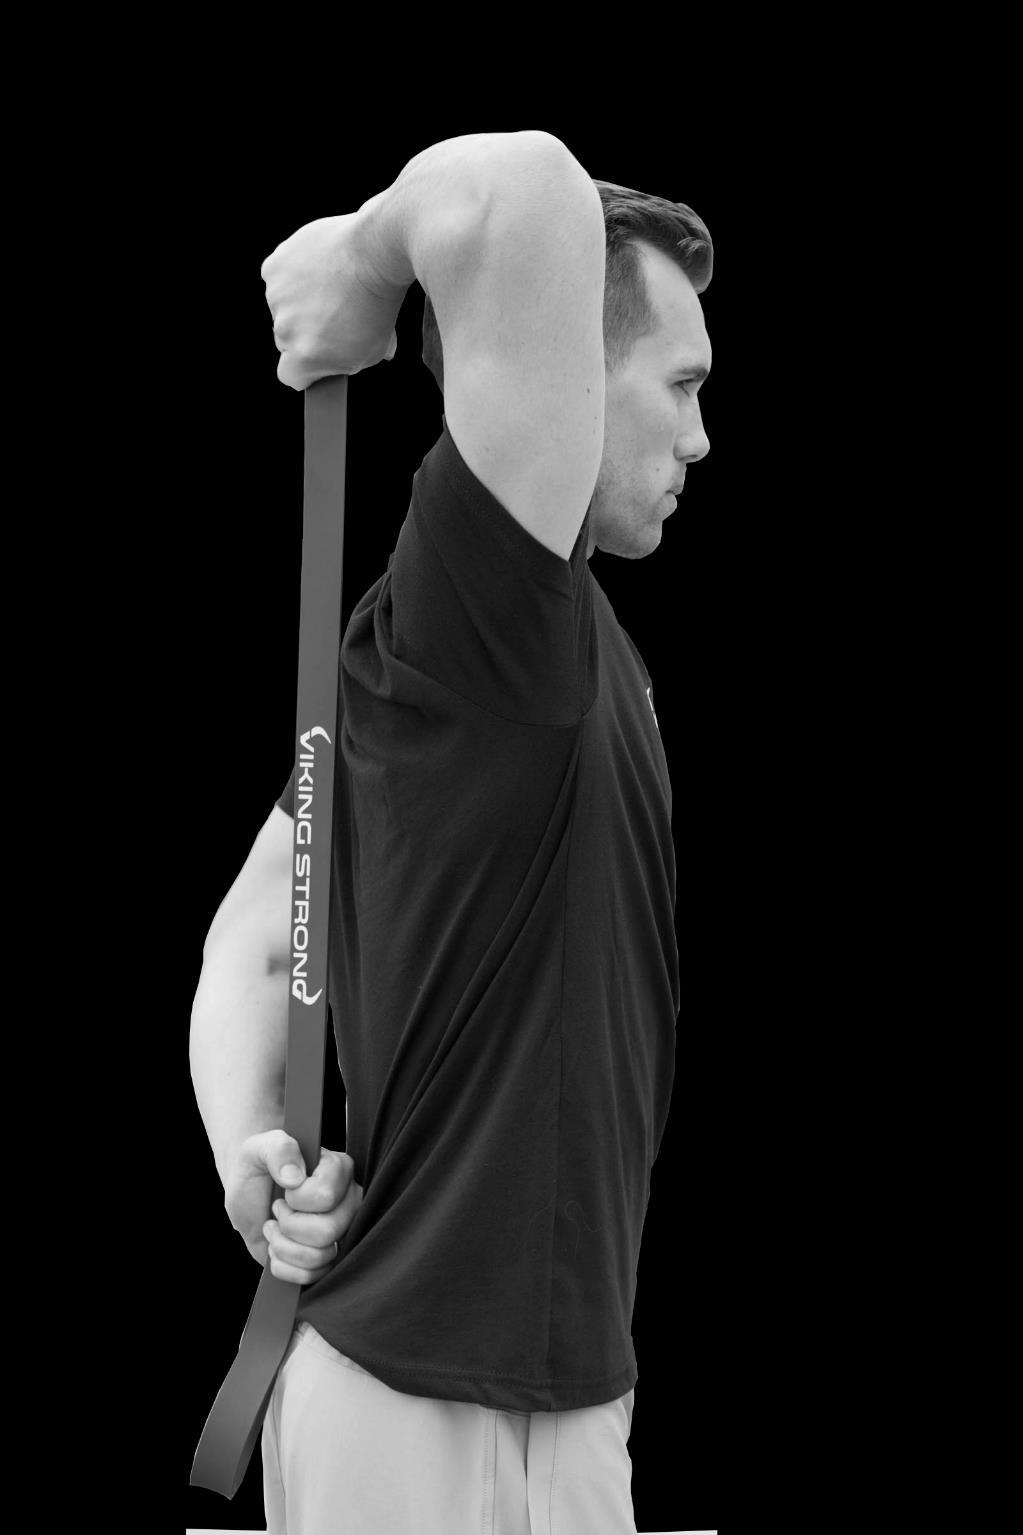 Tricep Stretch. Position the band behind head so that the band hangs down behind body.